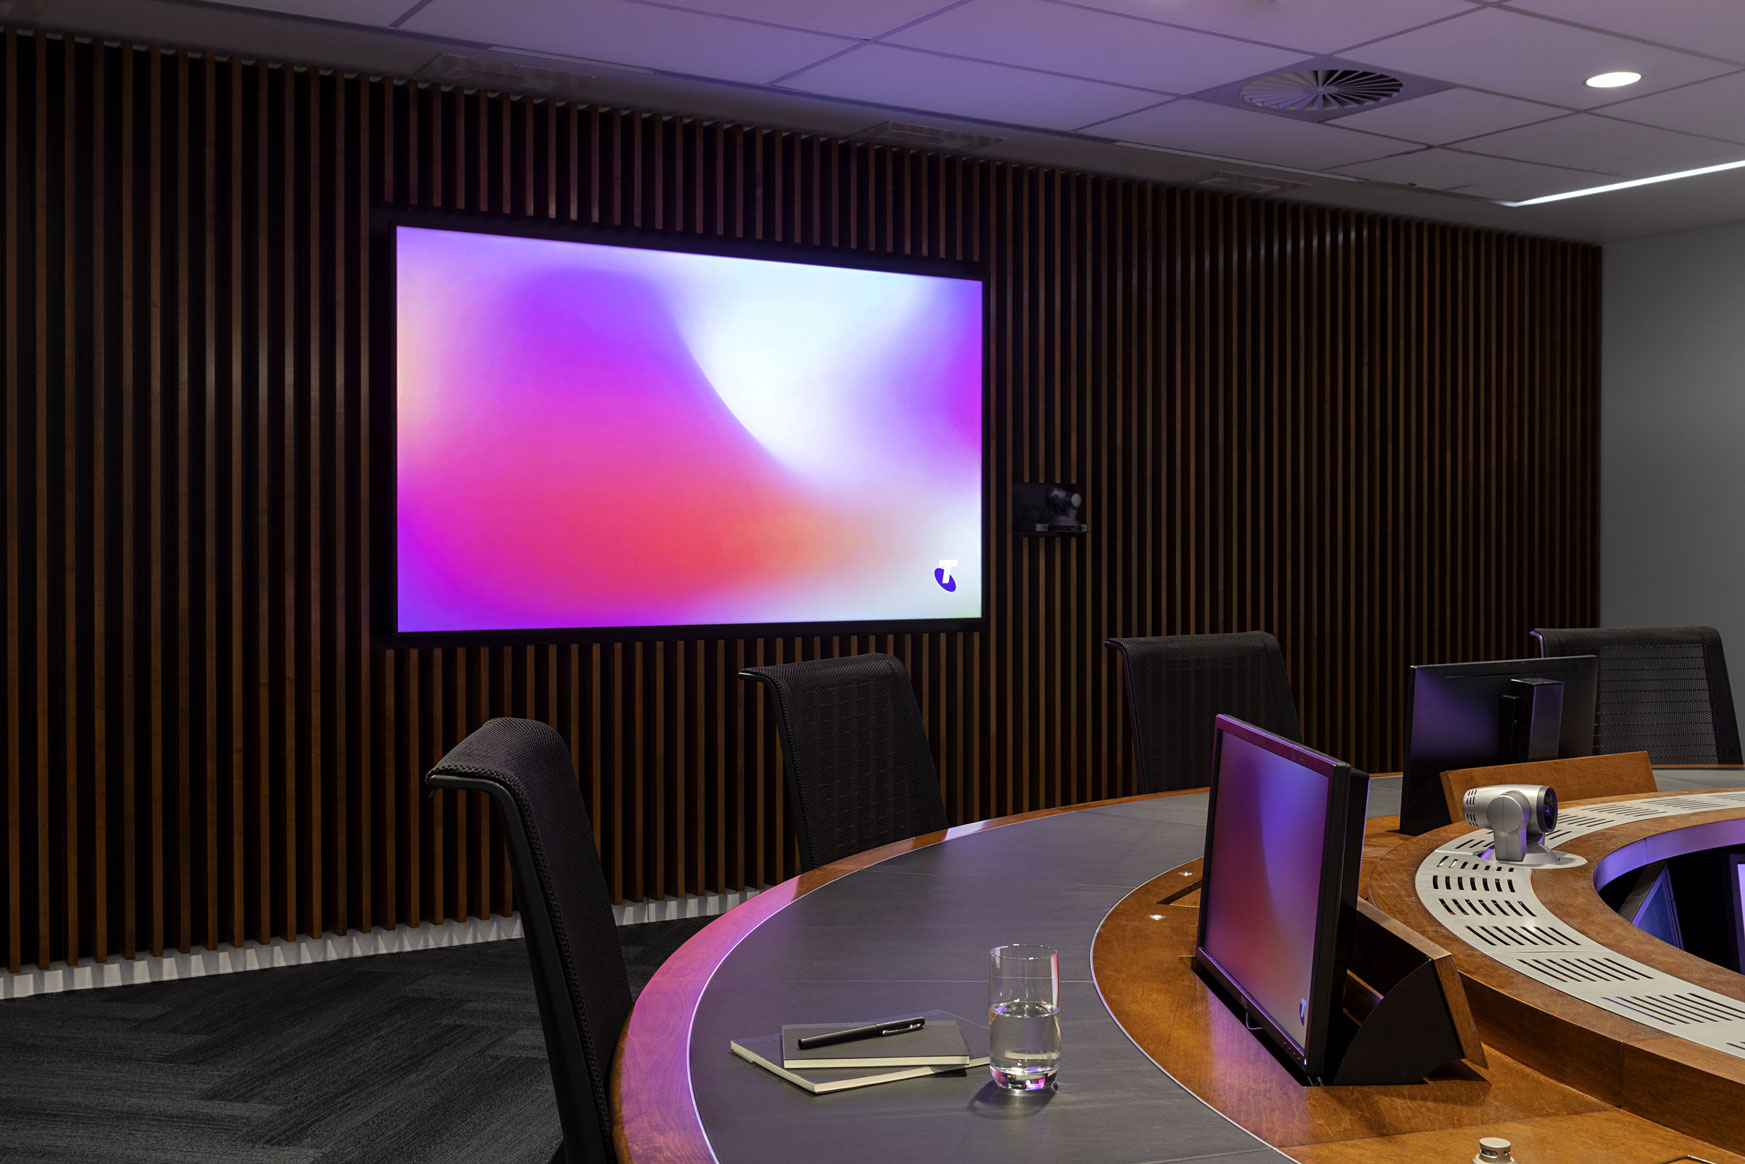 Telstra whirlpool room conference table